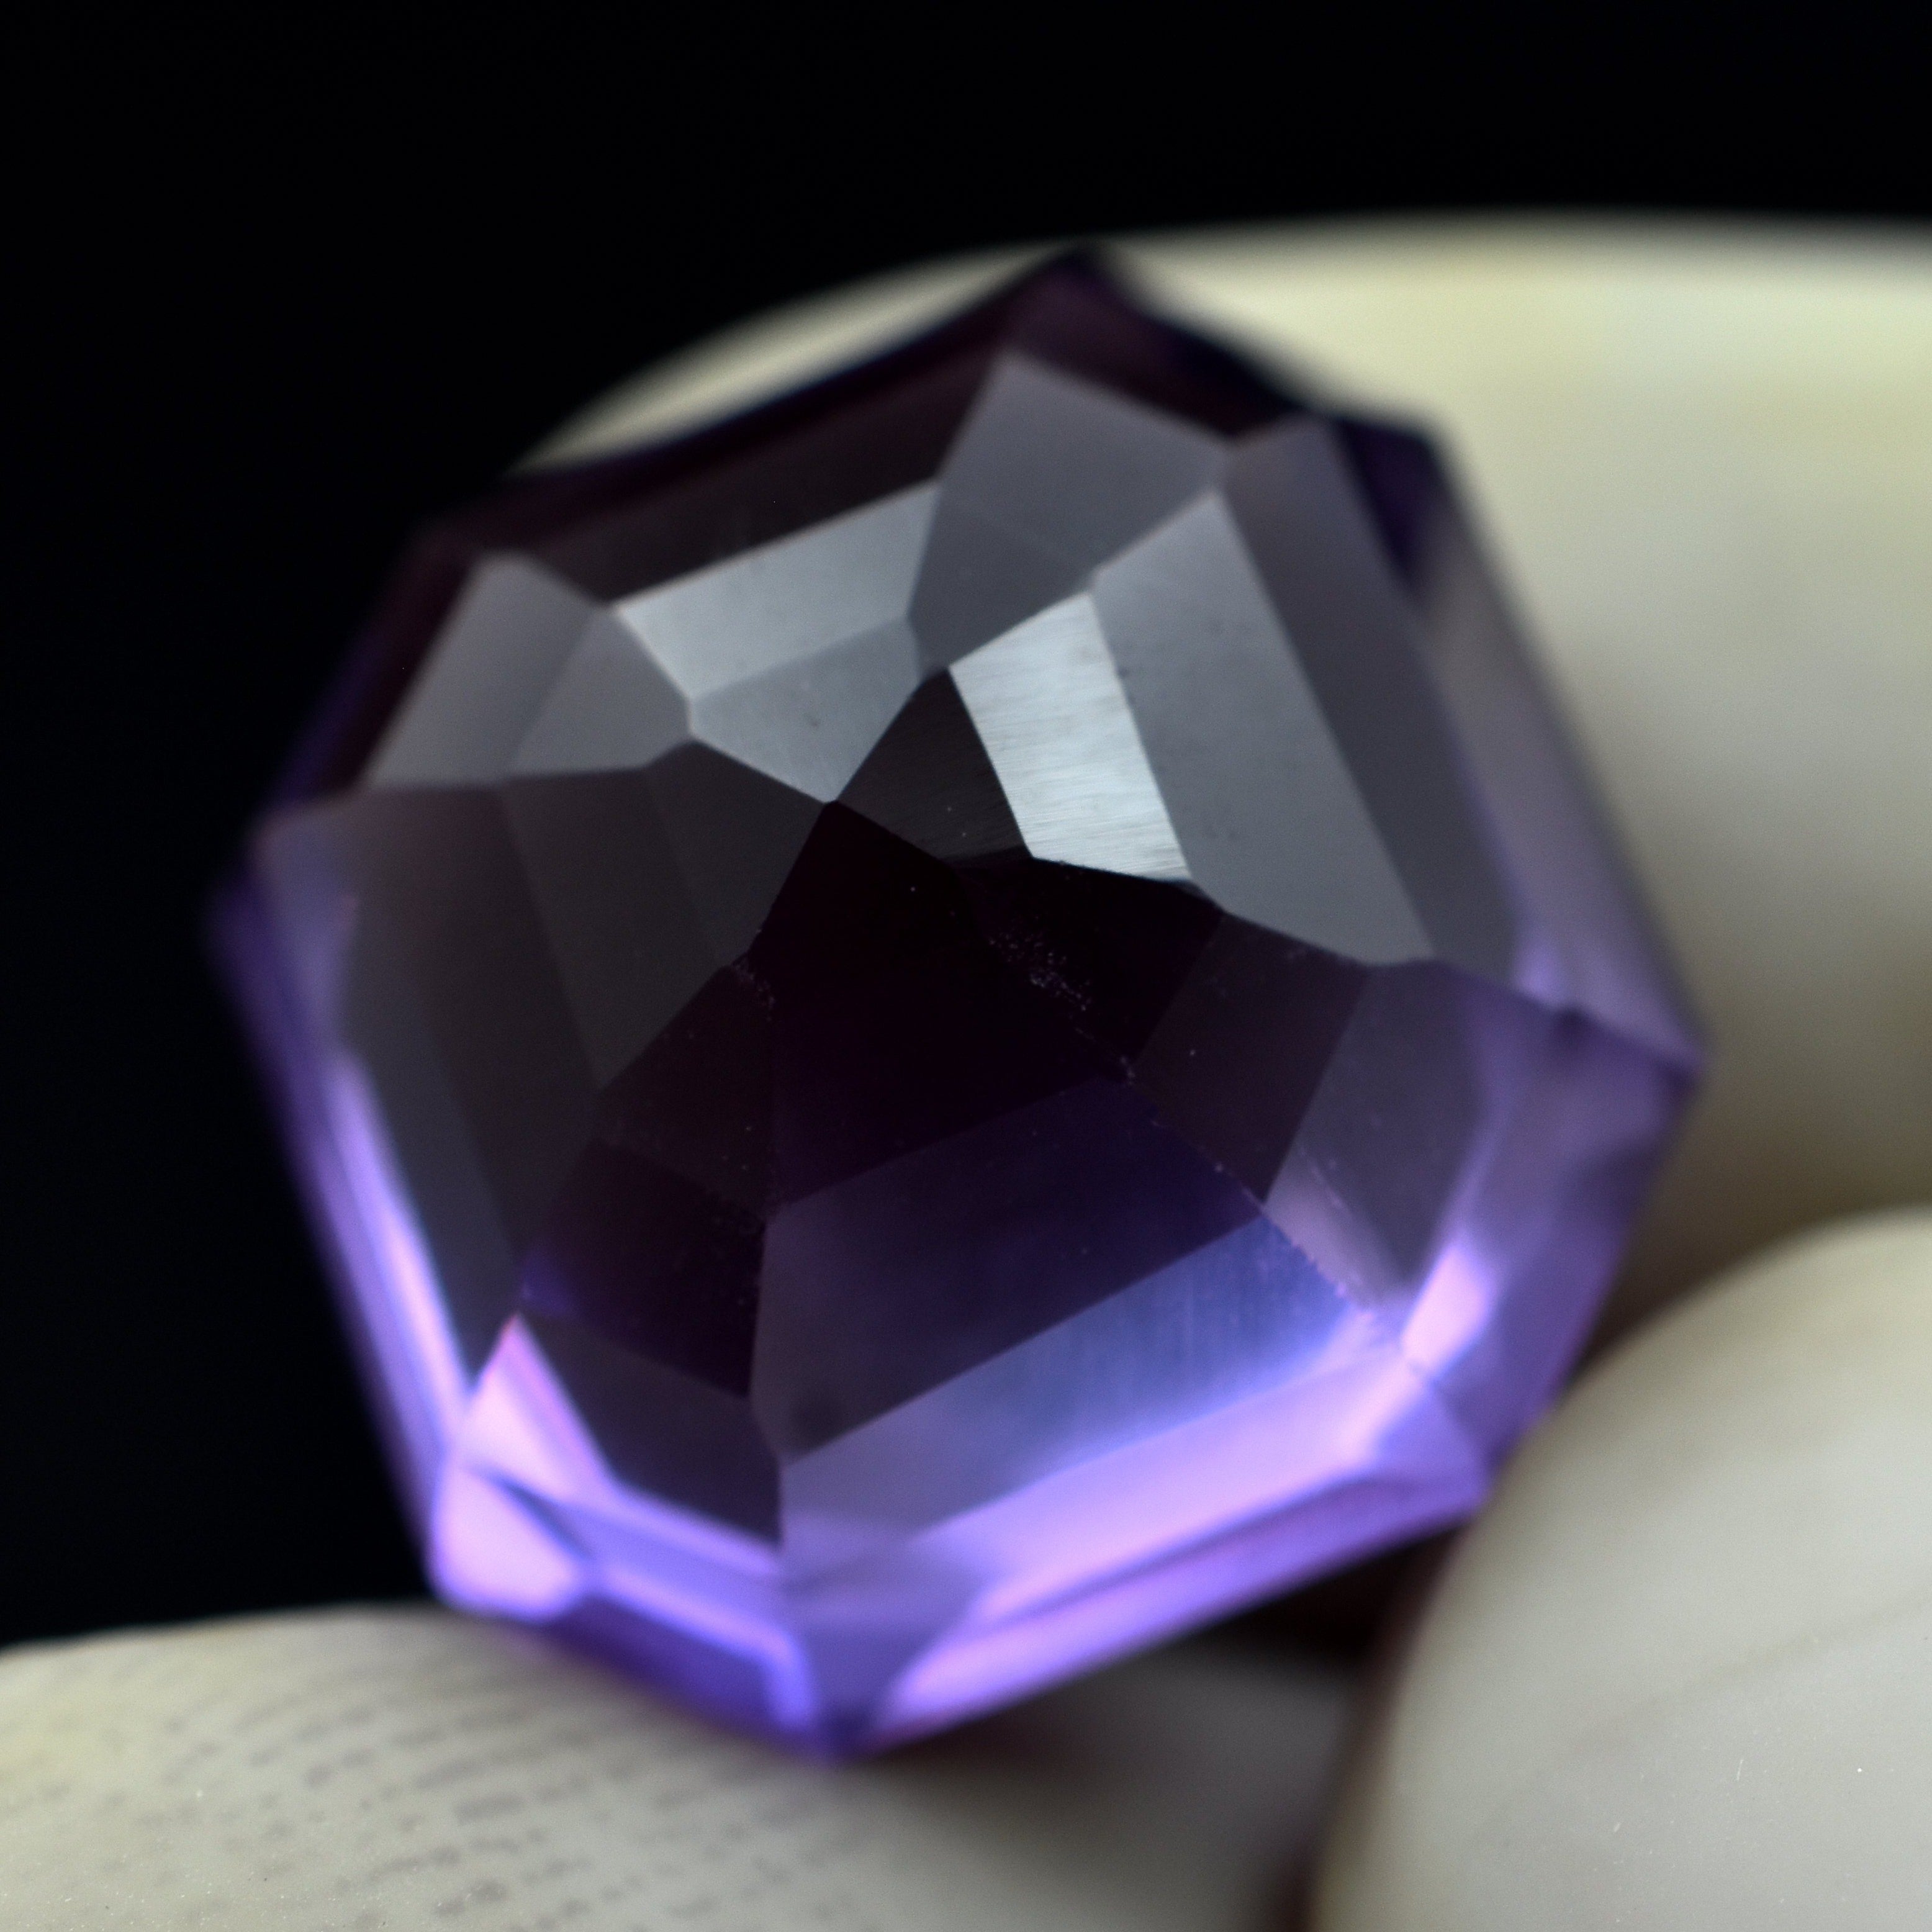 ON SALE- SAPPHIRE GEM !!! Color Change 10.52 Ct Beautiful Purple Sapphire Natural Loose Gem From Sri Lanka Have Best Collection | For Jewelry | Demanding Sapphire Gem | Free Delivery Free Gift